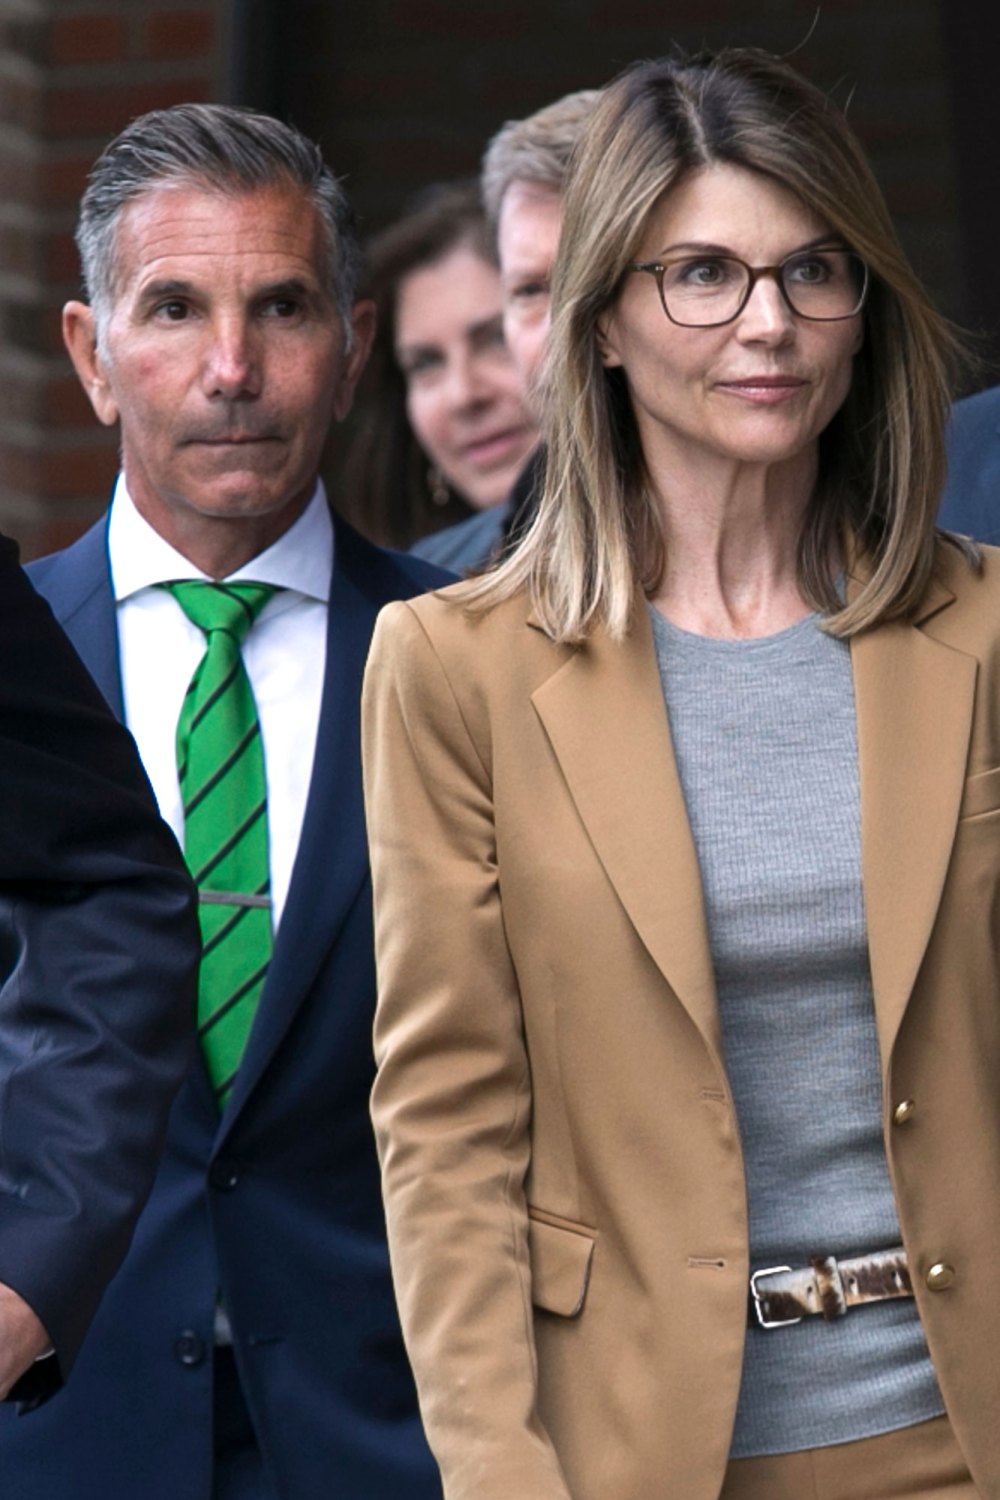 Lori Loughlin Husband Mossimo Giannulli Debuts New Look 2 Days Before Expected to Report to Prison